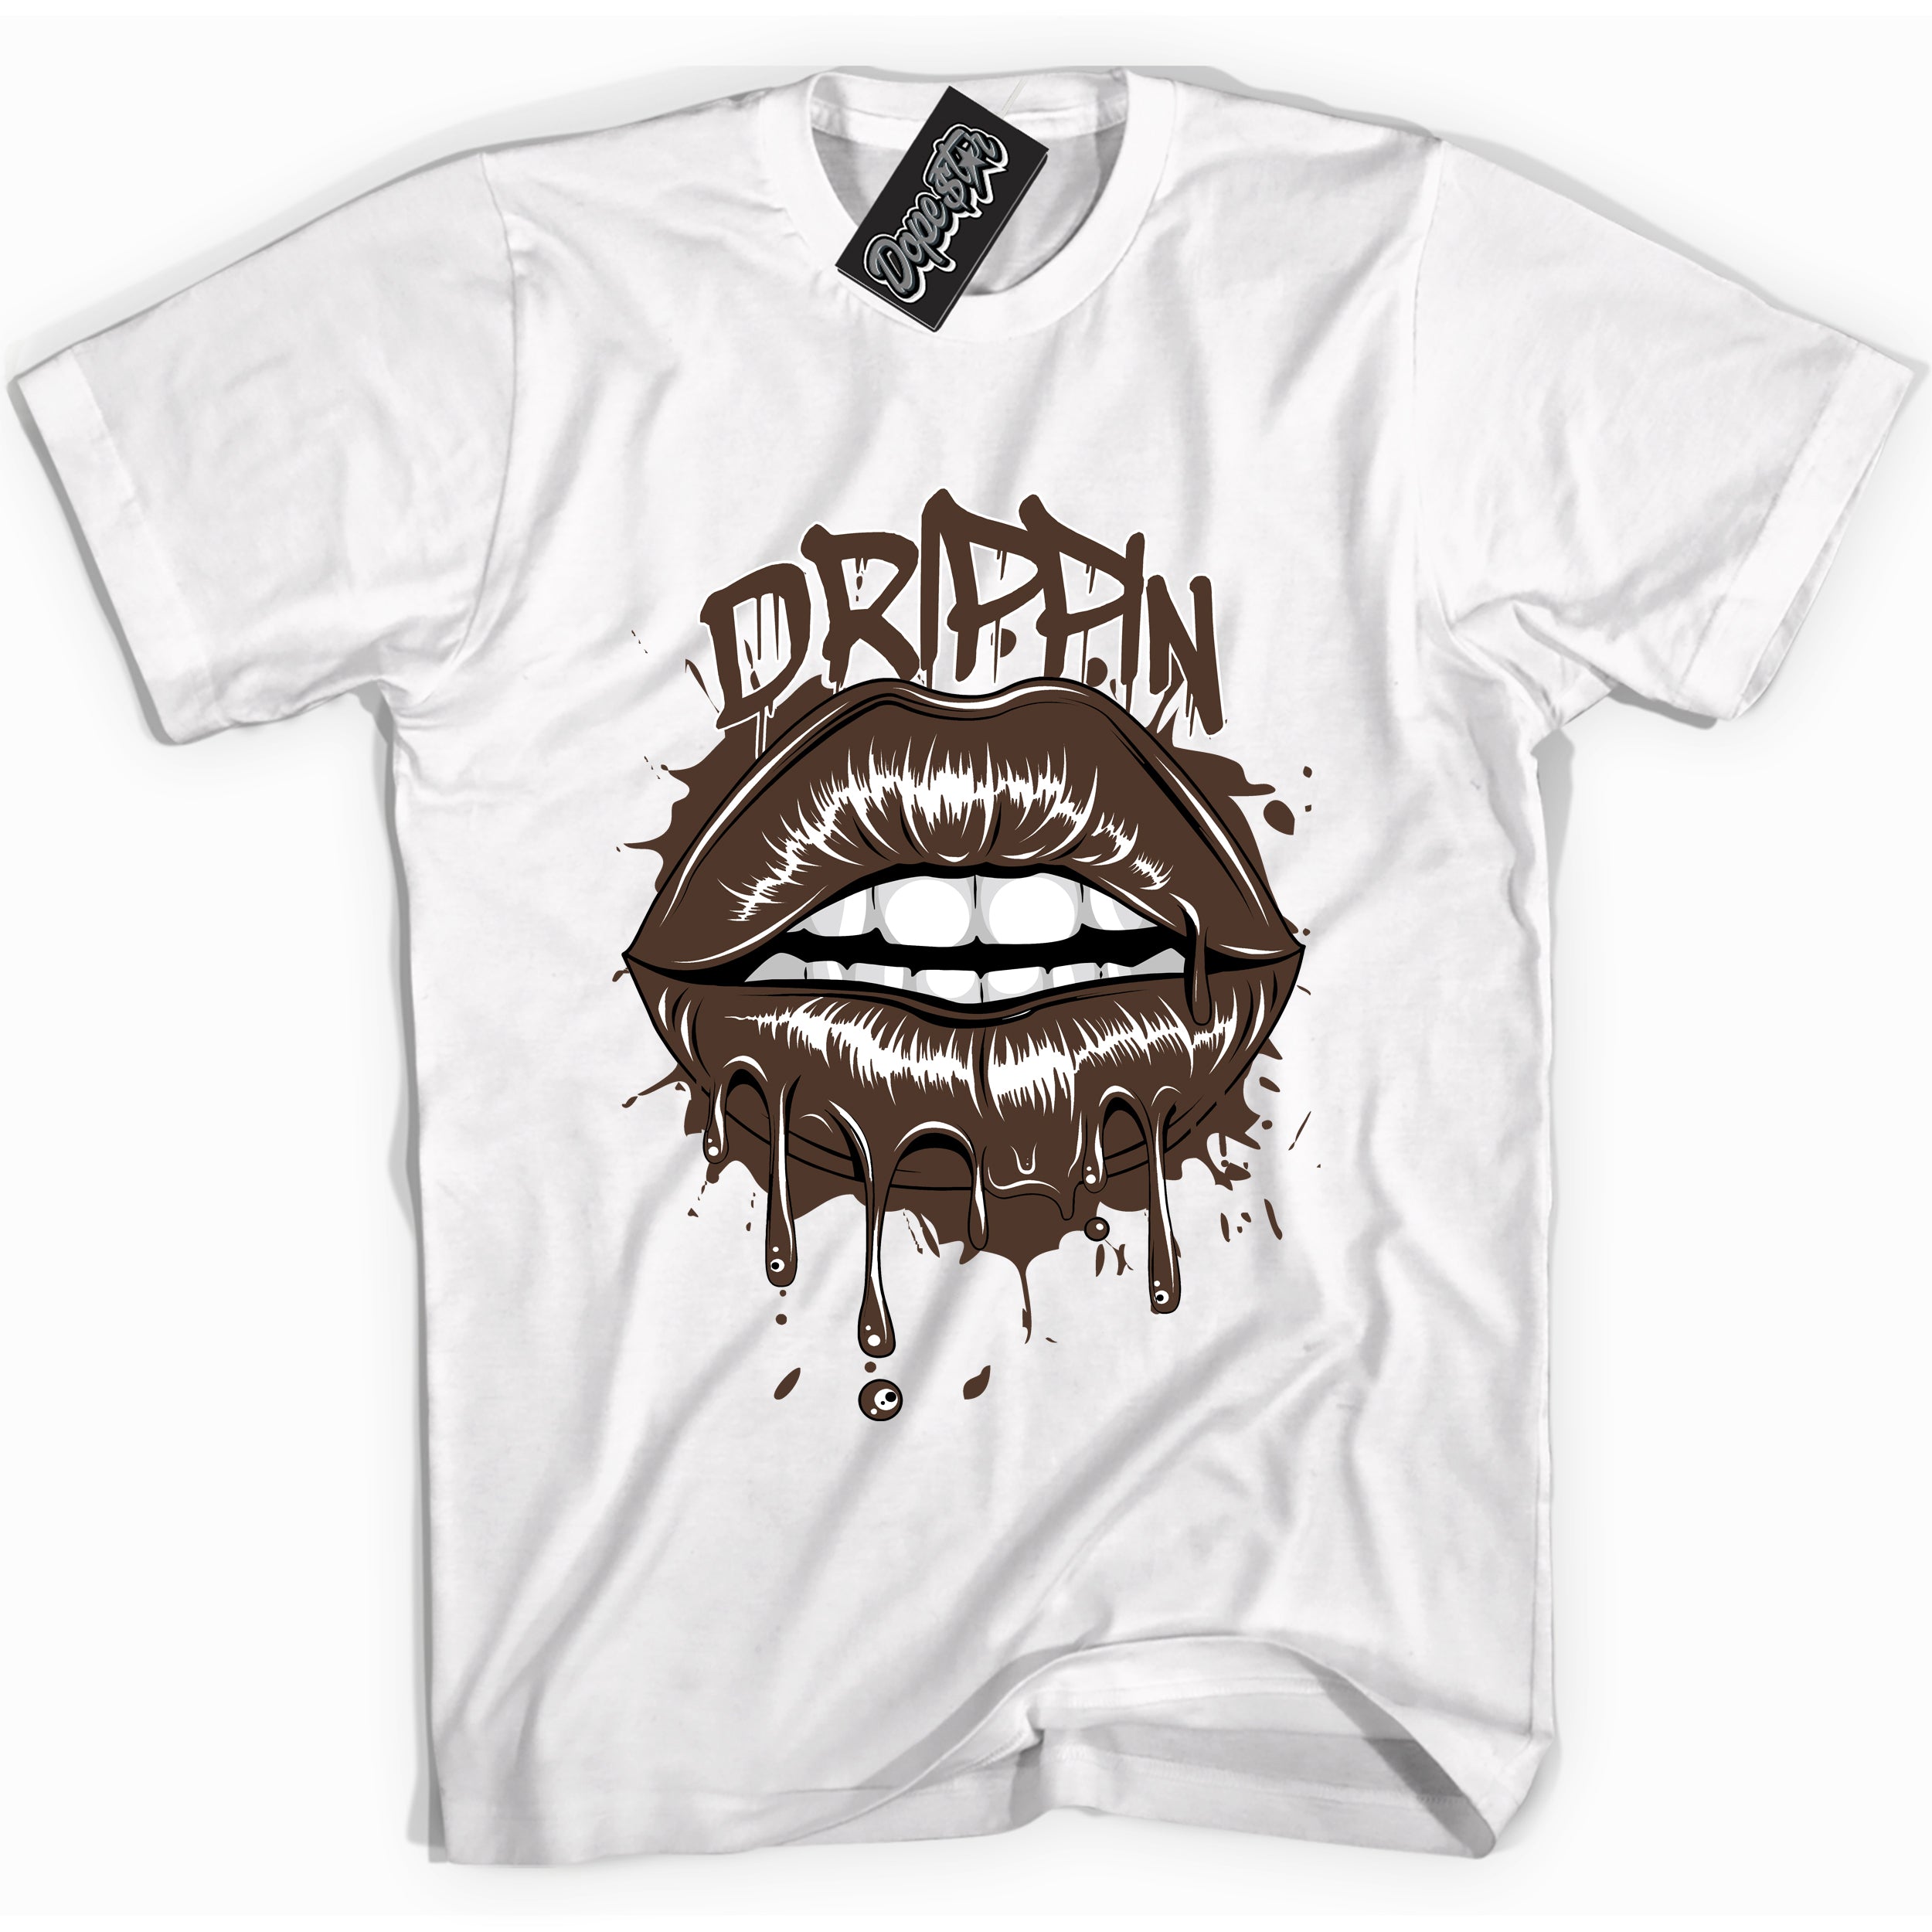 Cool White graphic tee with “ Drippin ” design, that perfectly matches Palomino 1s sneakers 